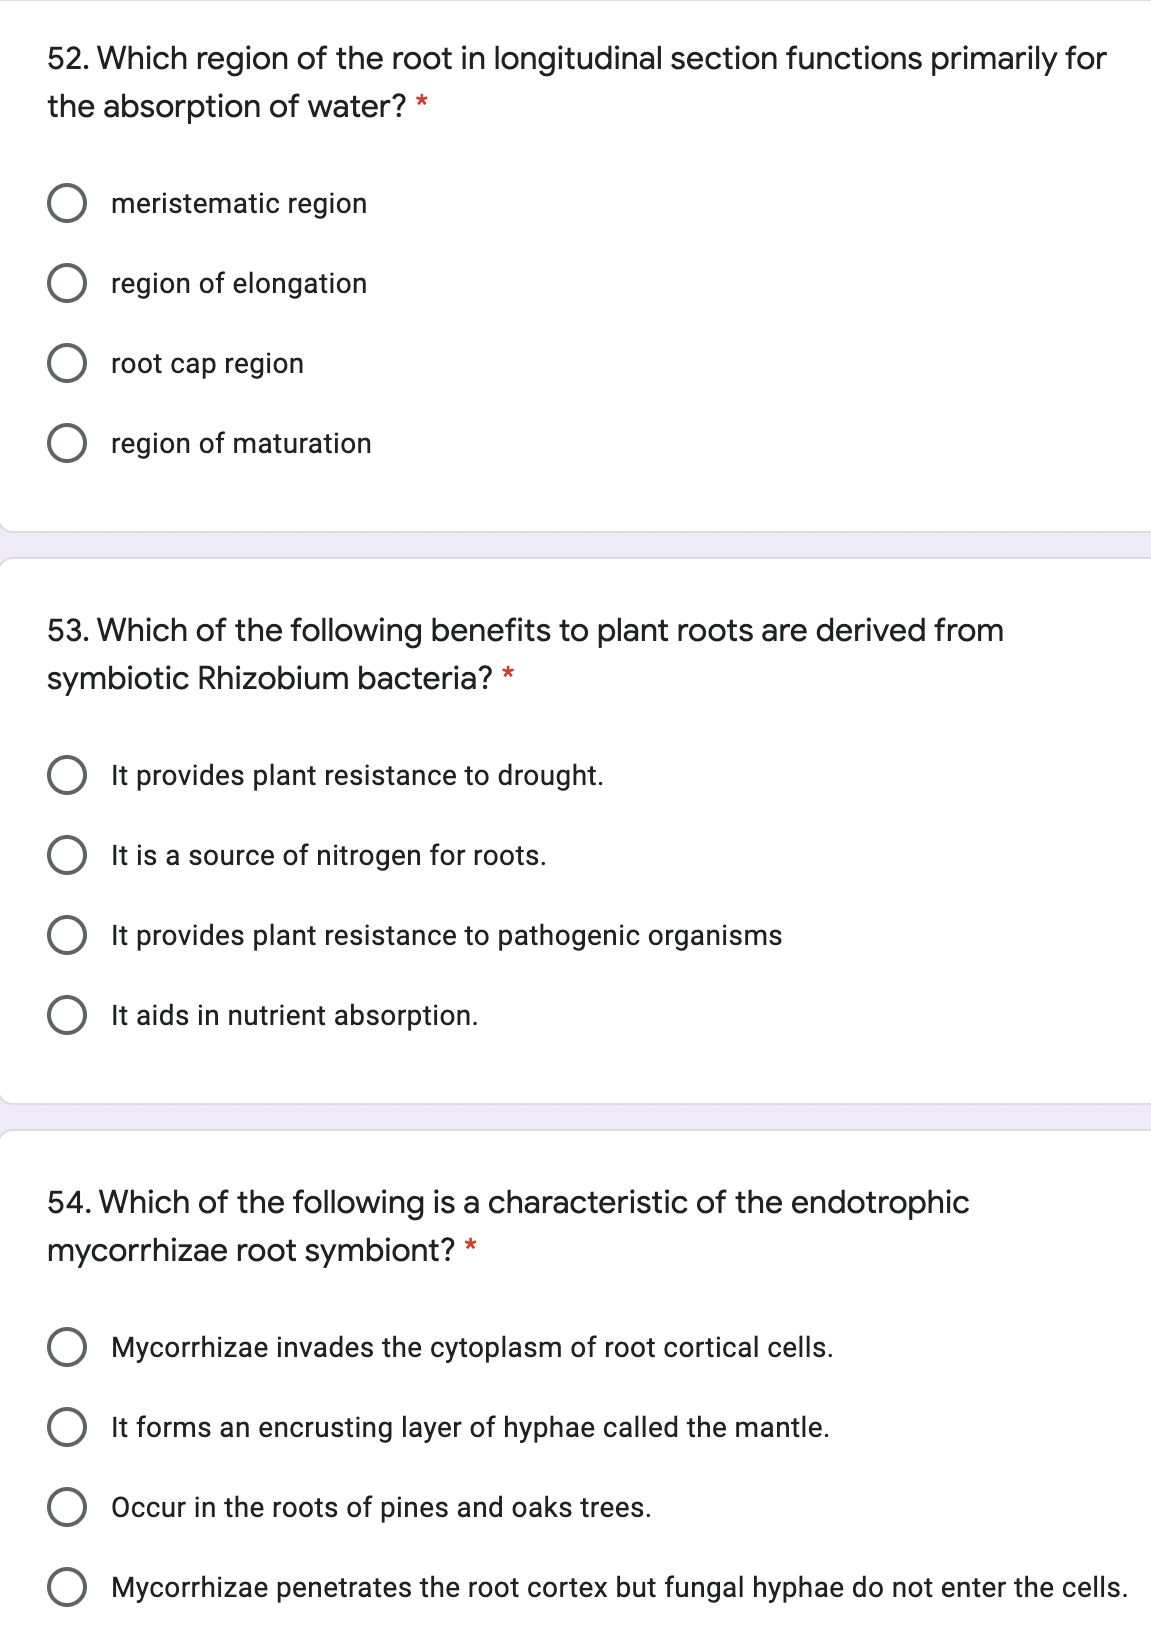 52. Which region of the root in longitudinal section functions primarily for
the absorption of water? *
meristematic region
O region of elongation
O root cap region
O region of maturation
53. Which of the following benefits to plant roots are derived from
symbiotic Rhizobium bacteria? *
It provides plant resistance to drought.
O It is a source of nitrogen for roots.
It provides plant resistance to pathogenic organisms
It aids in nutrient absorption.
54. Which of the following is a characteristic of the endotrophic
mycorrhizae root symbiont? *
Mycorrhizae invades the cytoplasm of root cortical cells.
It forms an encrusting layer of hyphae called the mantle.
Occur in the roots of pines and oaks trees.
Mycorrhizae penetrates the root cortex but fungal hyphae do not enter the cells.
